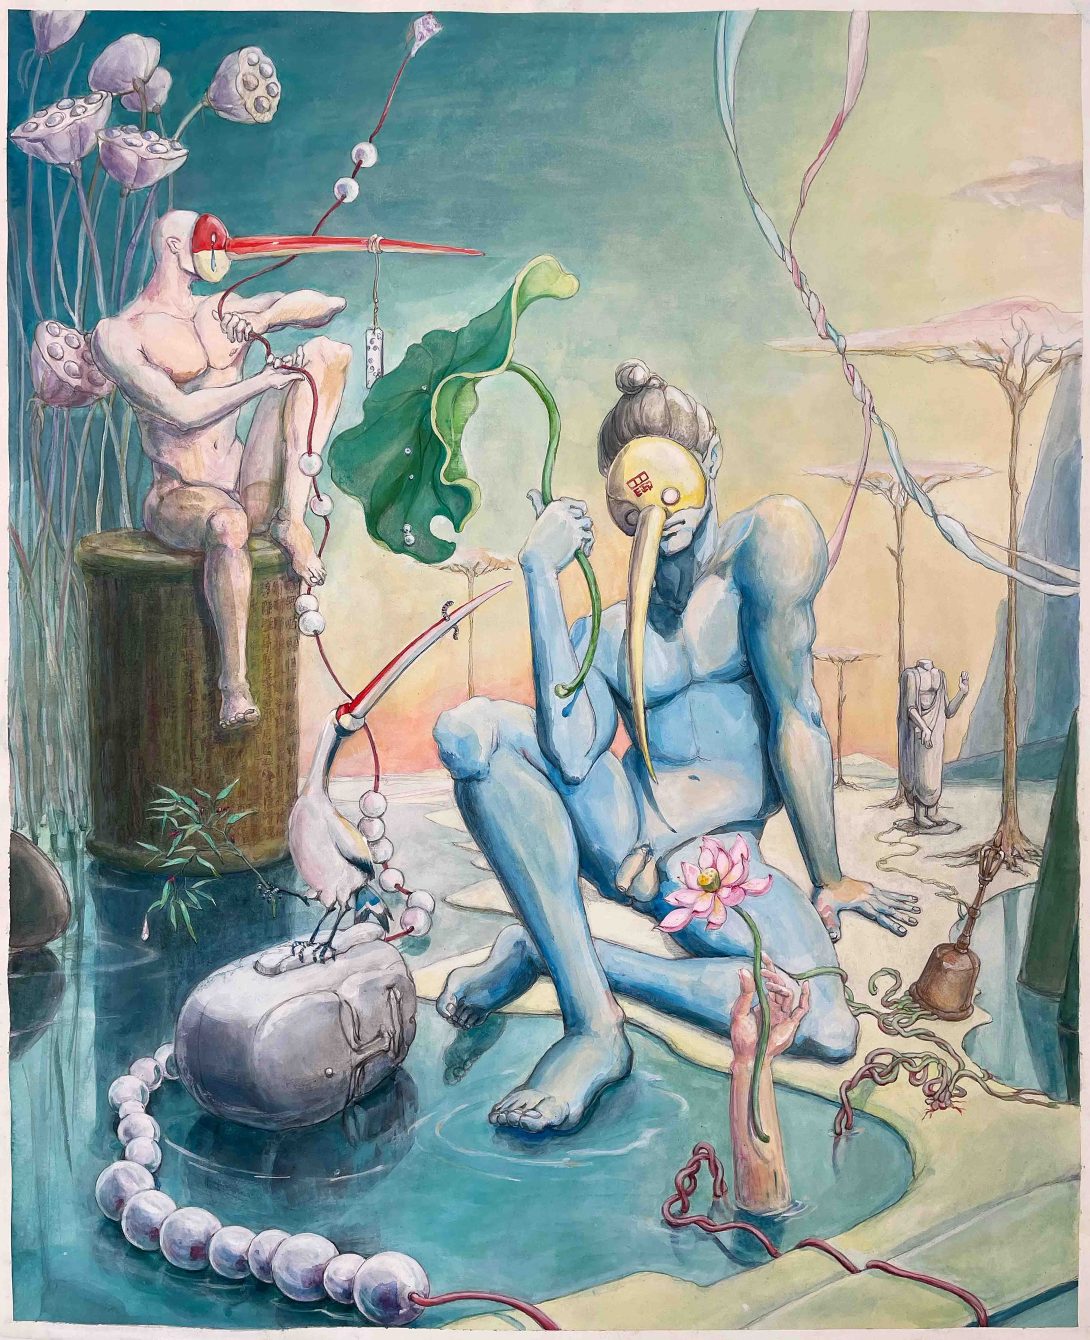 A blue figure rests beside a body of water holding a lotus leaf. There is a sculpture of a head floating on the water besides the figure. On the sculpture stands a three-legged bird. Its one leg grabs bamboo flowers. On the other side of the blue figure, there is a bell. A hand holding a lotus flower emerges from the water. Another figure sits in the background on a bamboo culm appearing from the water, and beads pearl-like seeds into belts. The culm is engraved with Mandarin manuscripts. There are giant lotus plants behind them. Both figures and the bird wear a beak-like mask. Further in the background, there is a headless figure making Varadamudra gesture, which symbolizes compassion and boon-granting. The color of the sky progresses from blue to warm red.